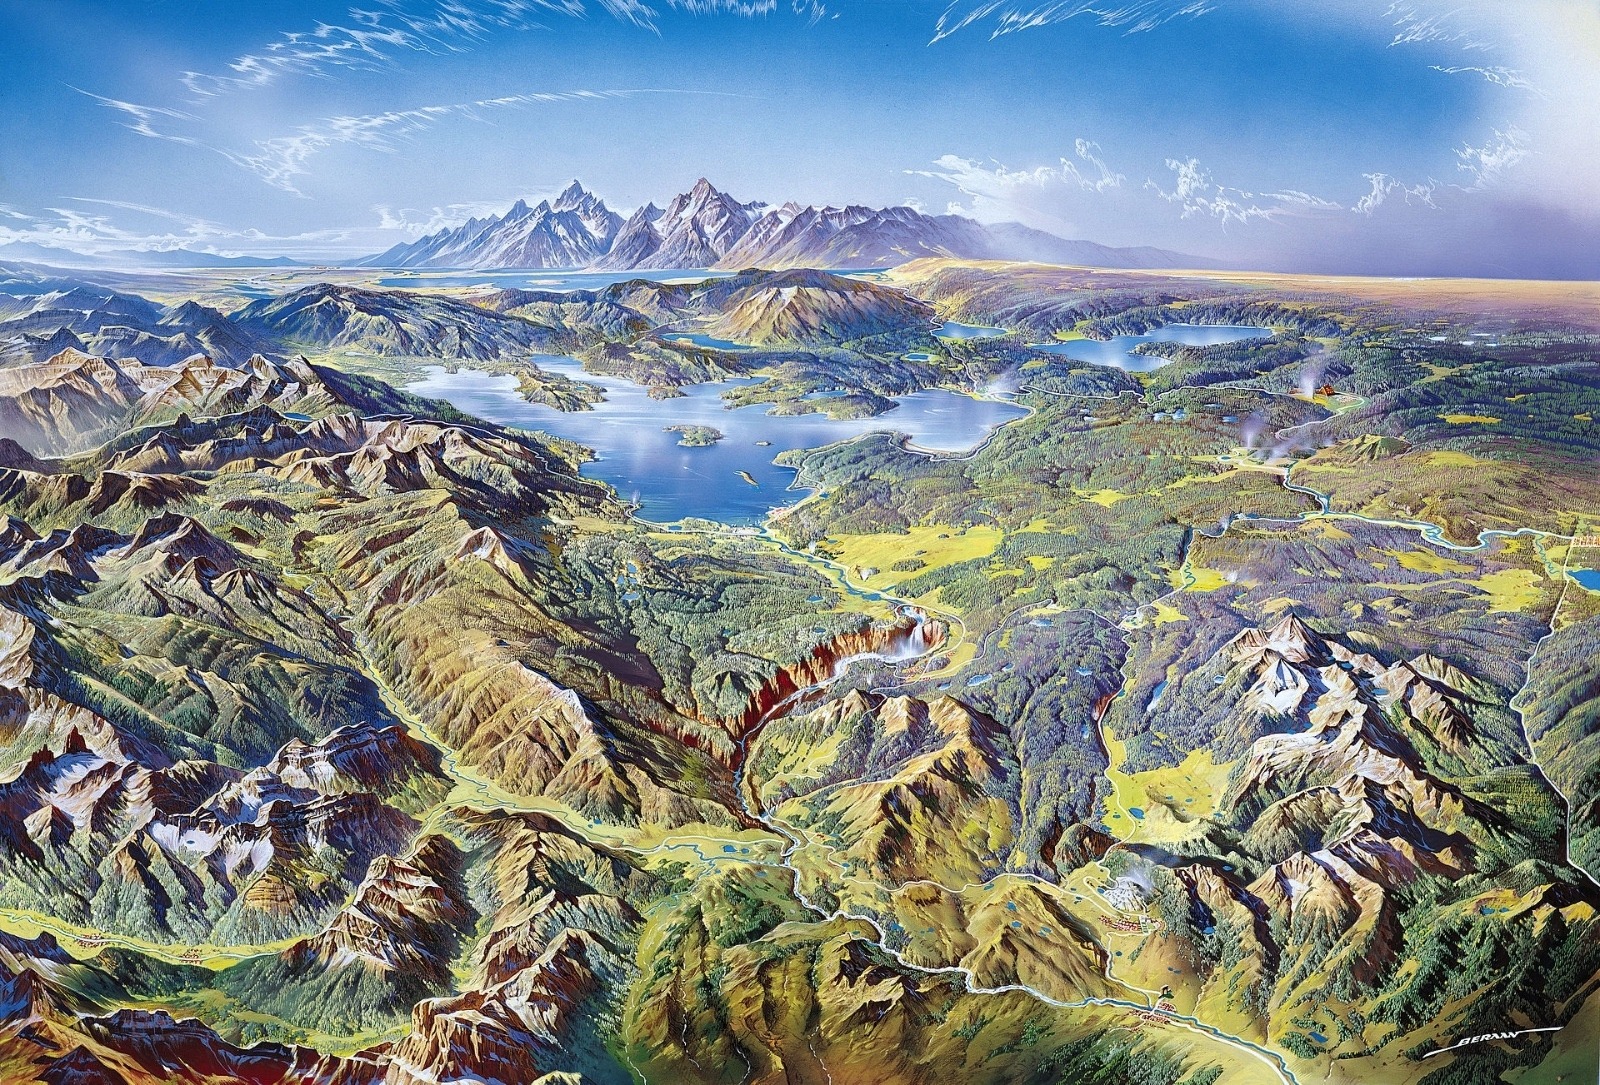 Heinrich Berann's illustration of the Greater Yellowstone Ecosystem, which will serve as Sean Cummins' outdoor reporting office for the summer.  Image courtesy NPS